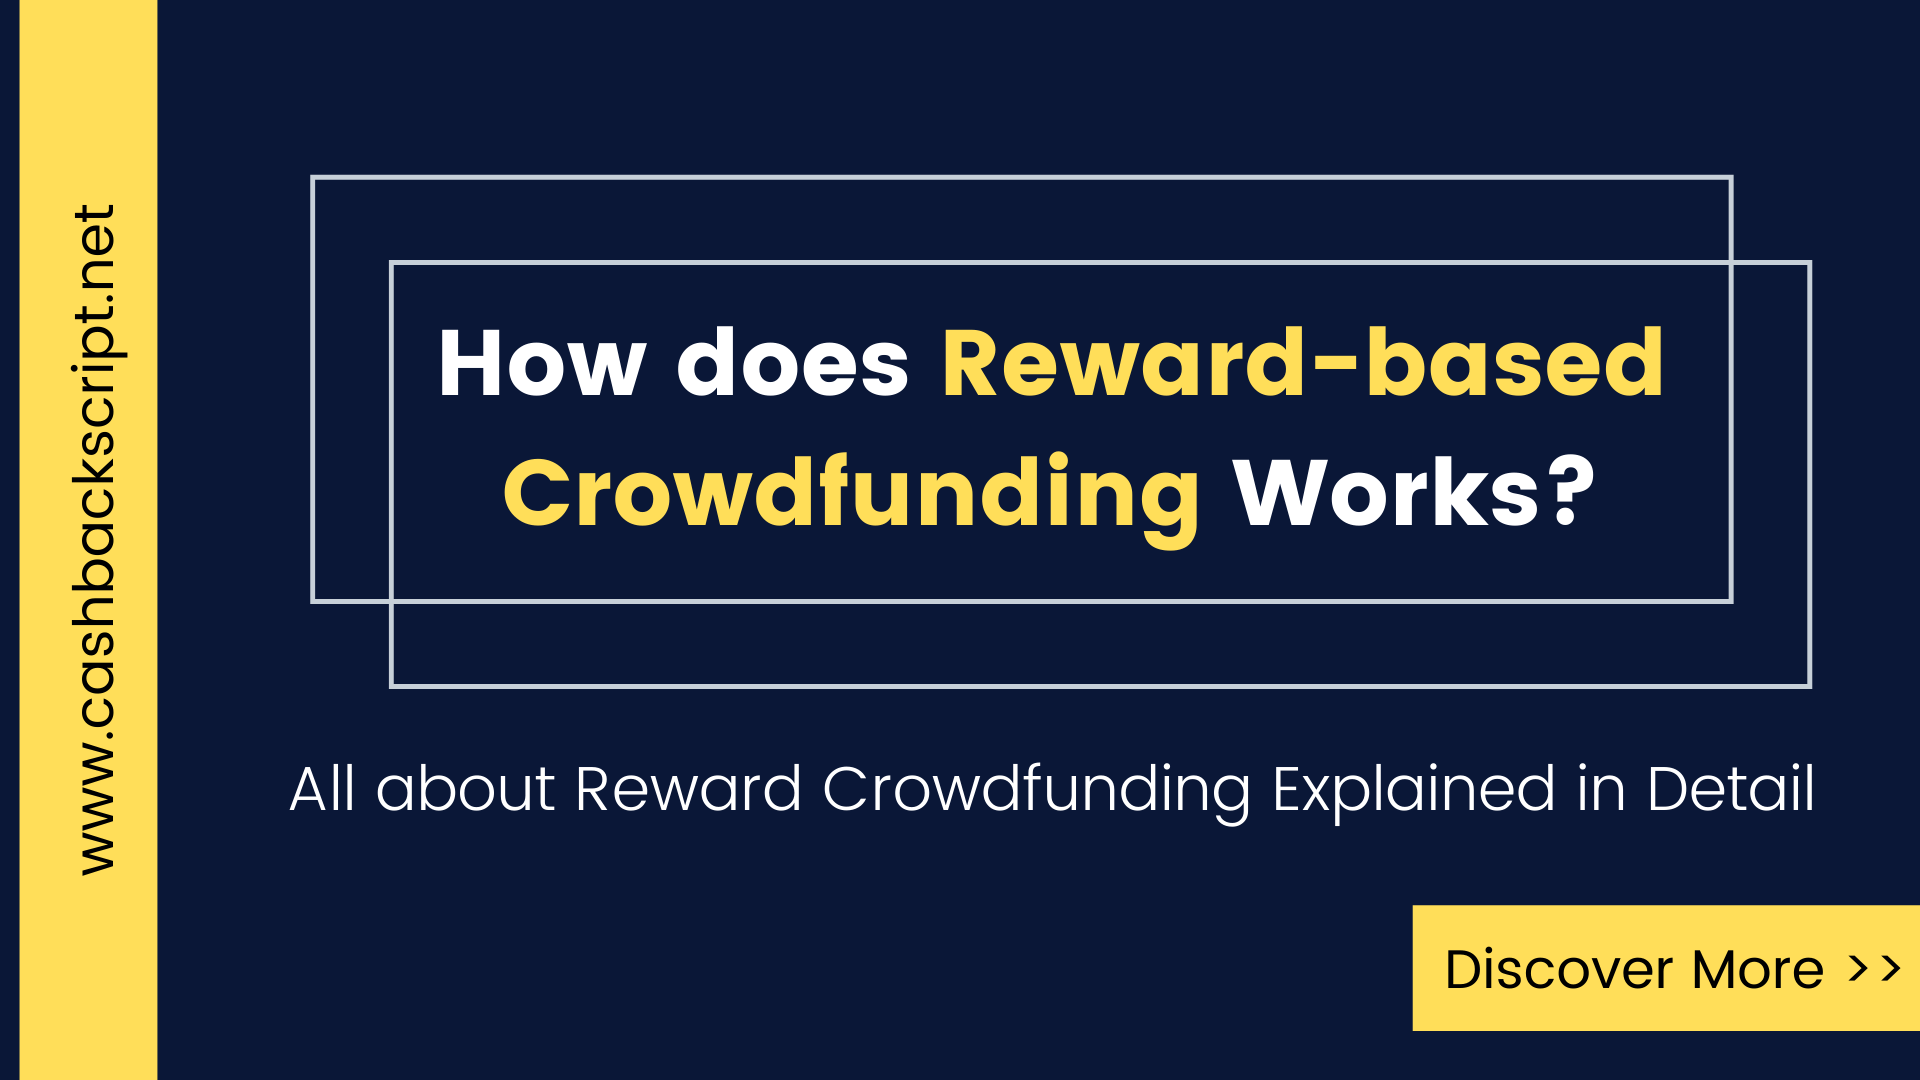 How does Rewards-based Crowdfunding Works?